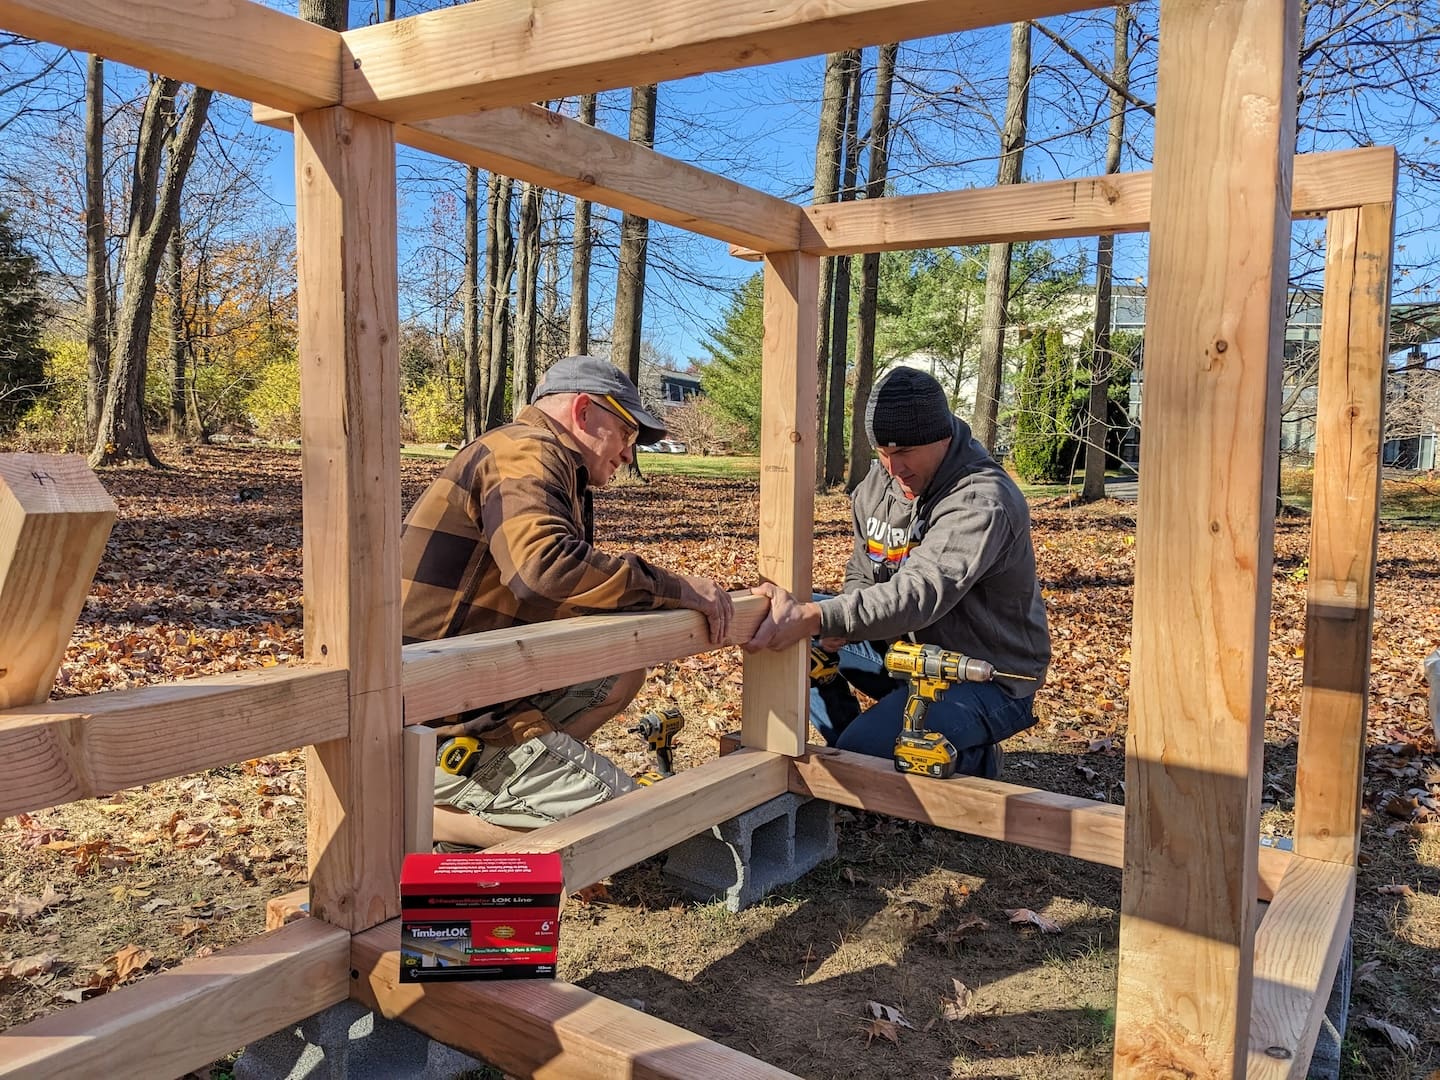 Jeff Towler, recruited through the Delaware Woodworks Guild, and his friend Keith Stengel help create bins for the Delaware Community Composting Initiative. (Ken Mammarella photo).